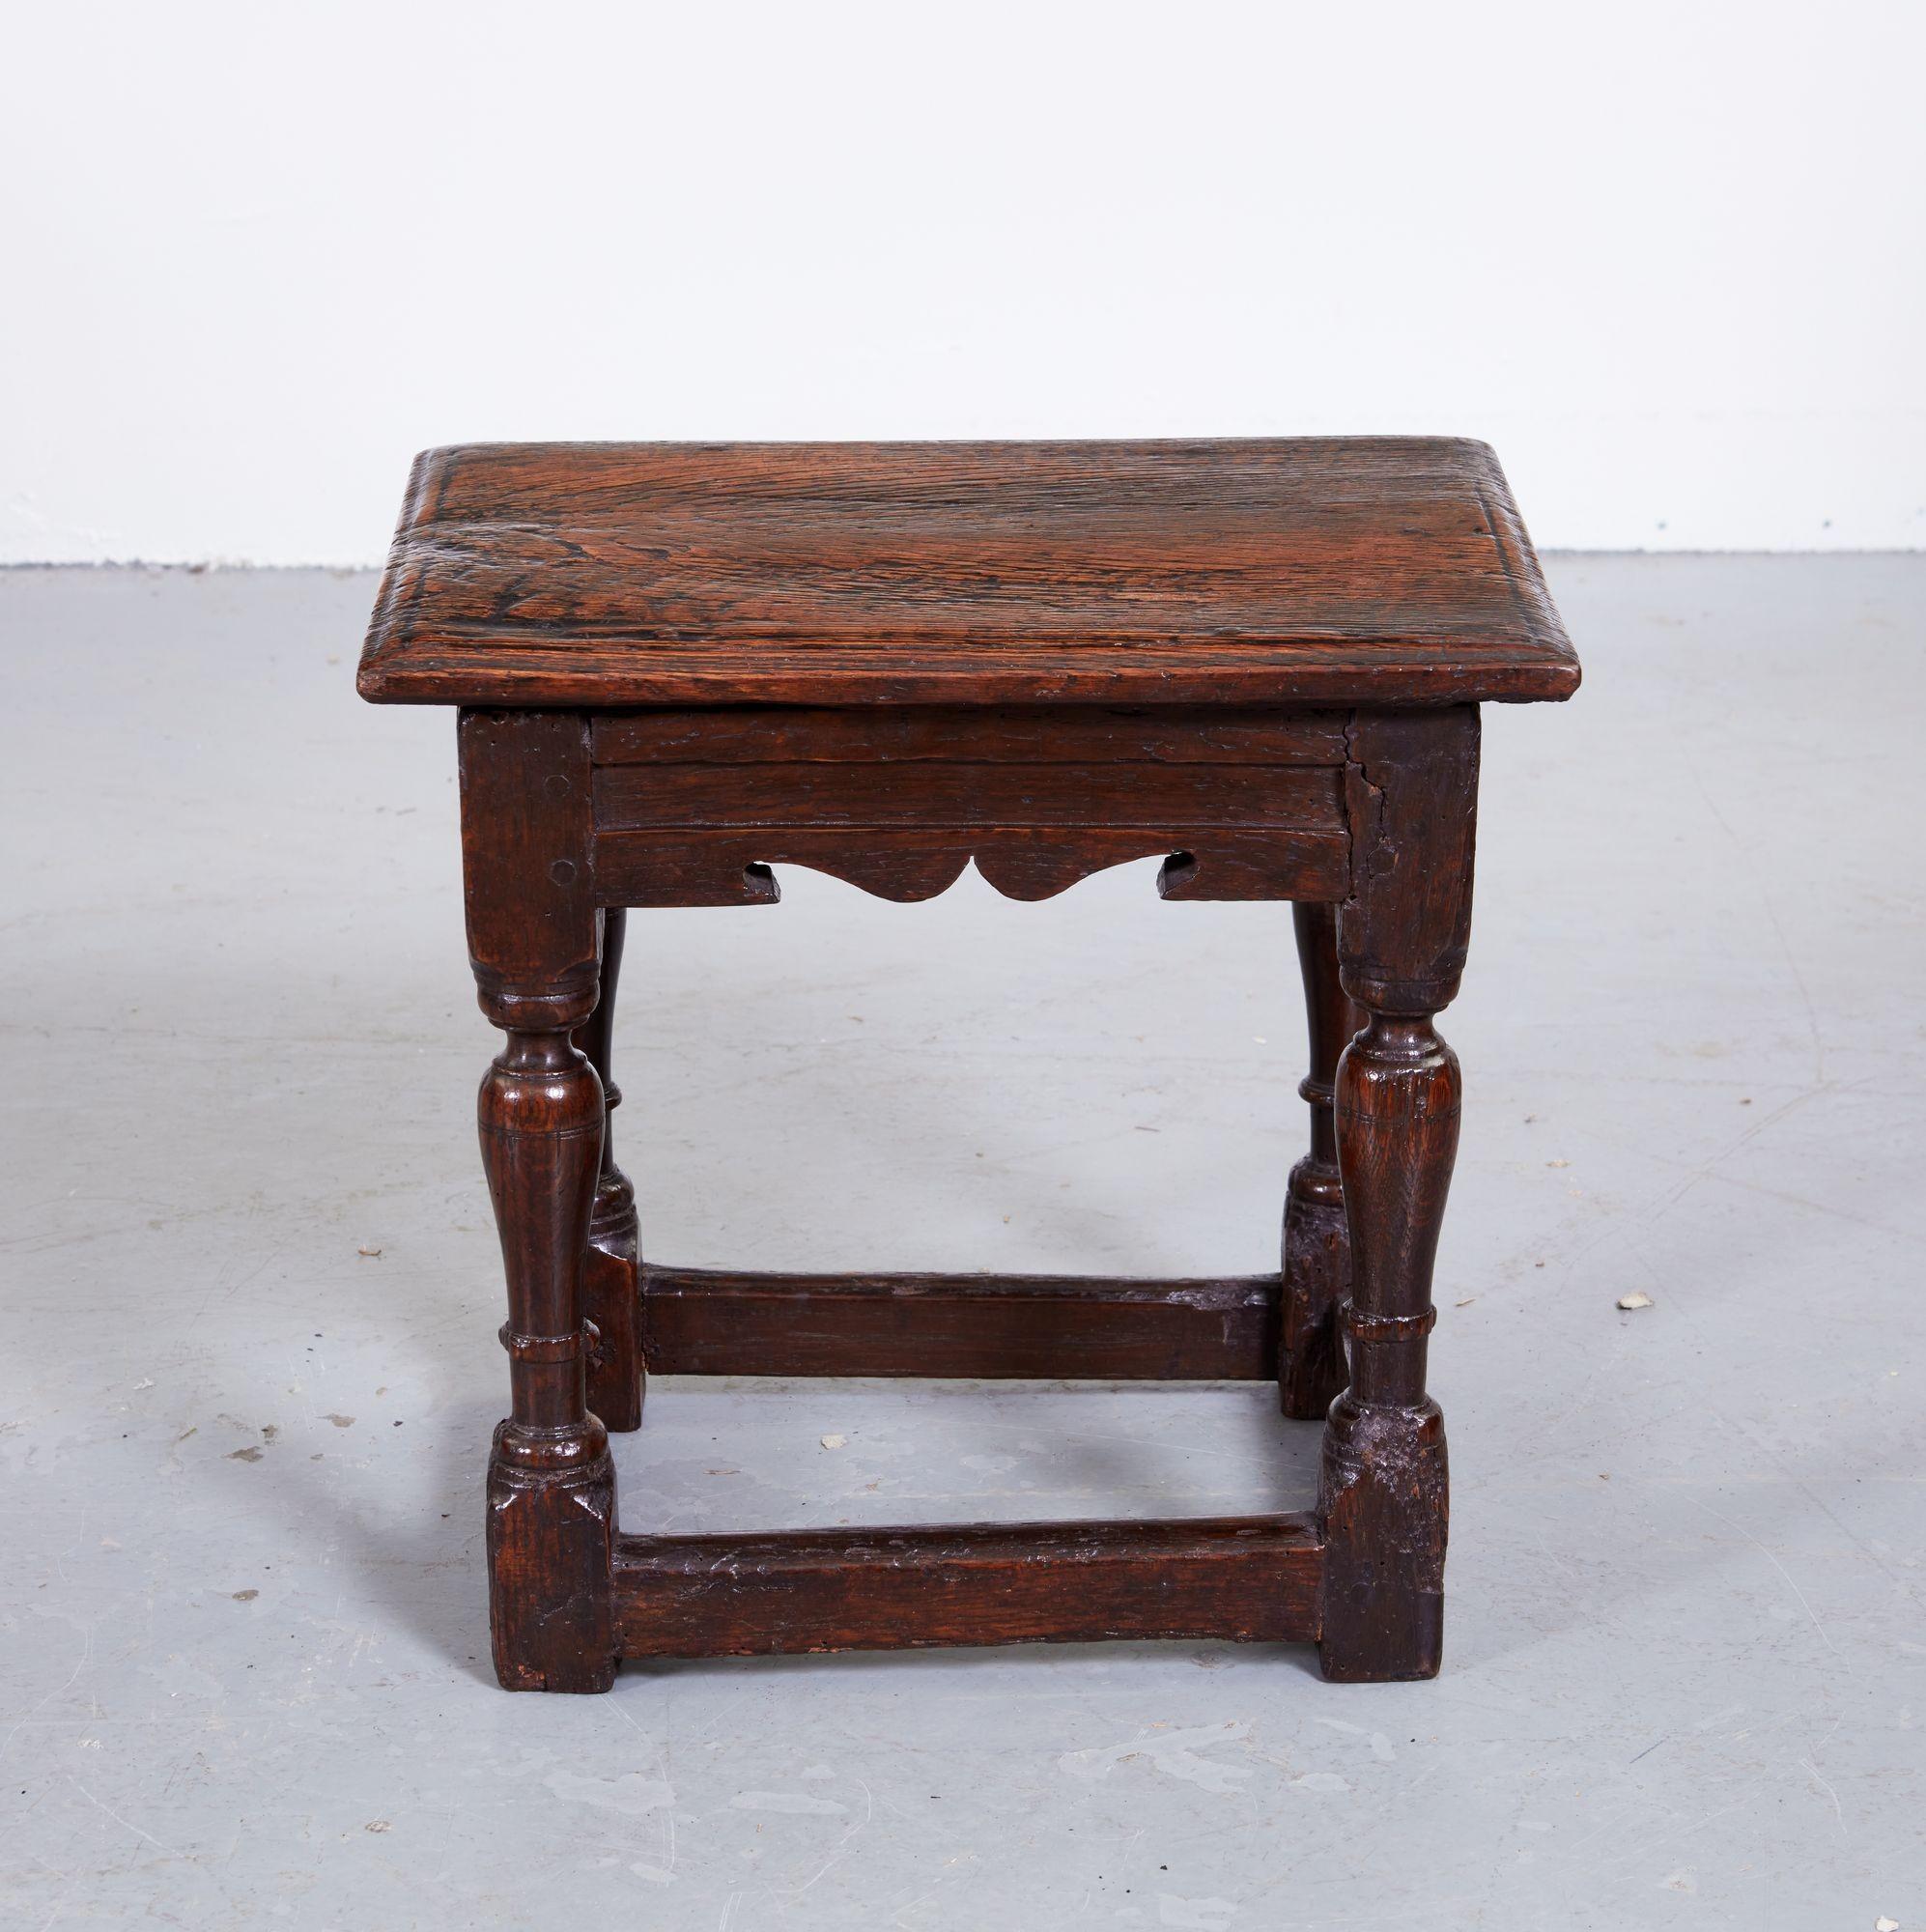 Rare 17th century English small table, also known as a child's joint stool, the single plank top with bead molded edge over molded stretchers with scalloped edge, standing on reverse vase turned legs joined by box stretchers, the whole possessing